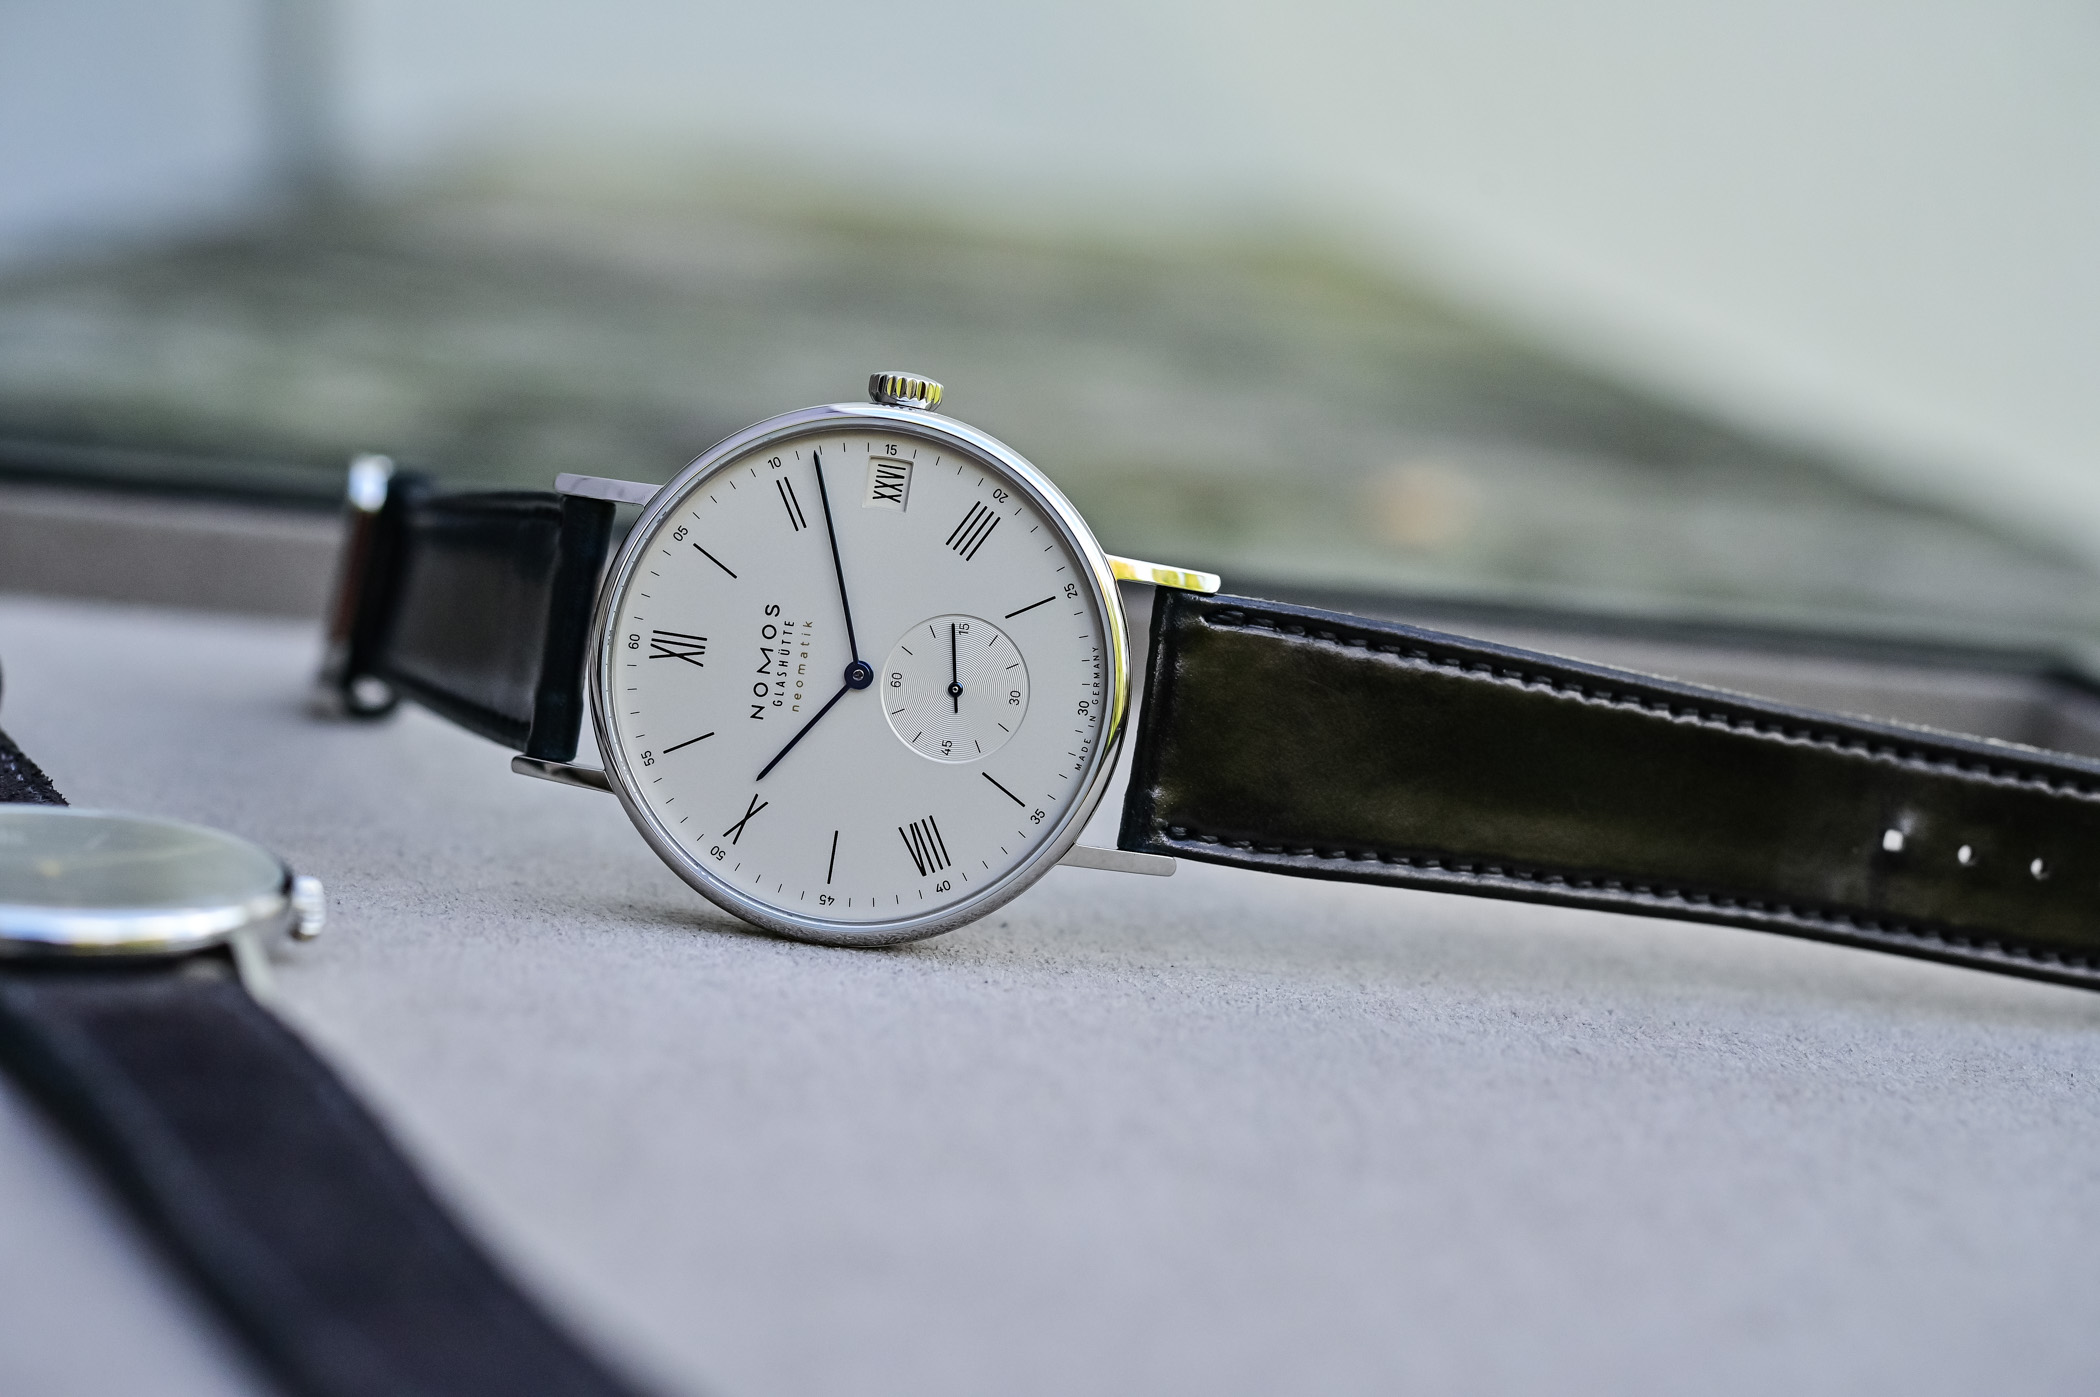 Nomos Ludwig neomatik 41 date Roman Numerals reference 262